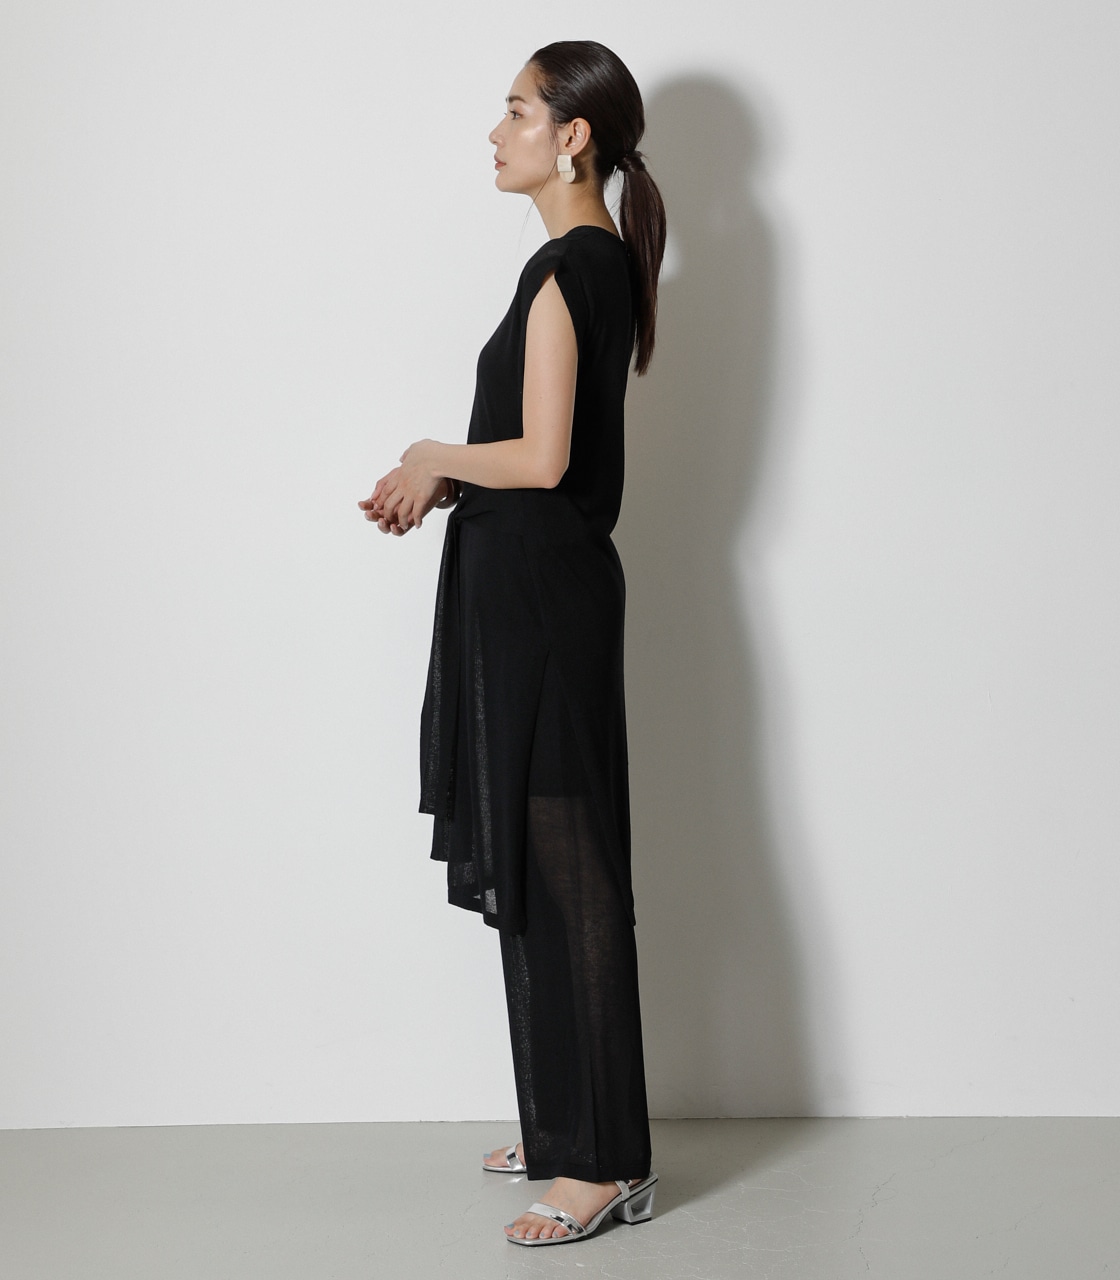 SHEER KNIT LONG TOPS/シアーニットロングトップス 詳細画像 BLK 6